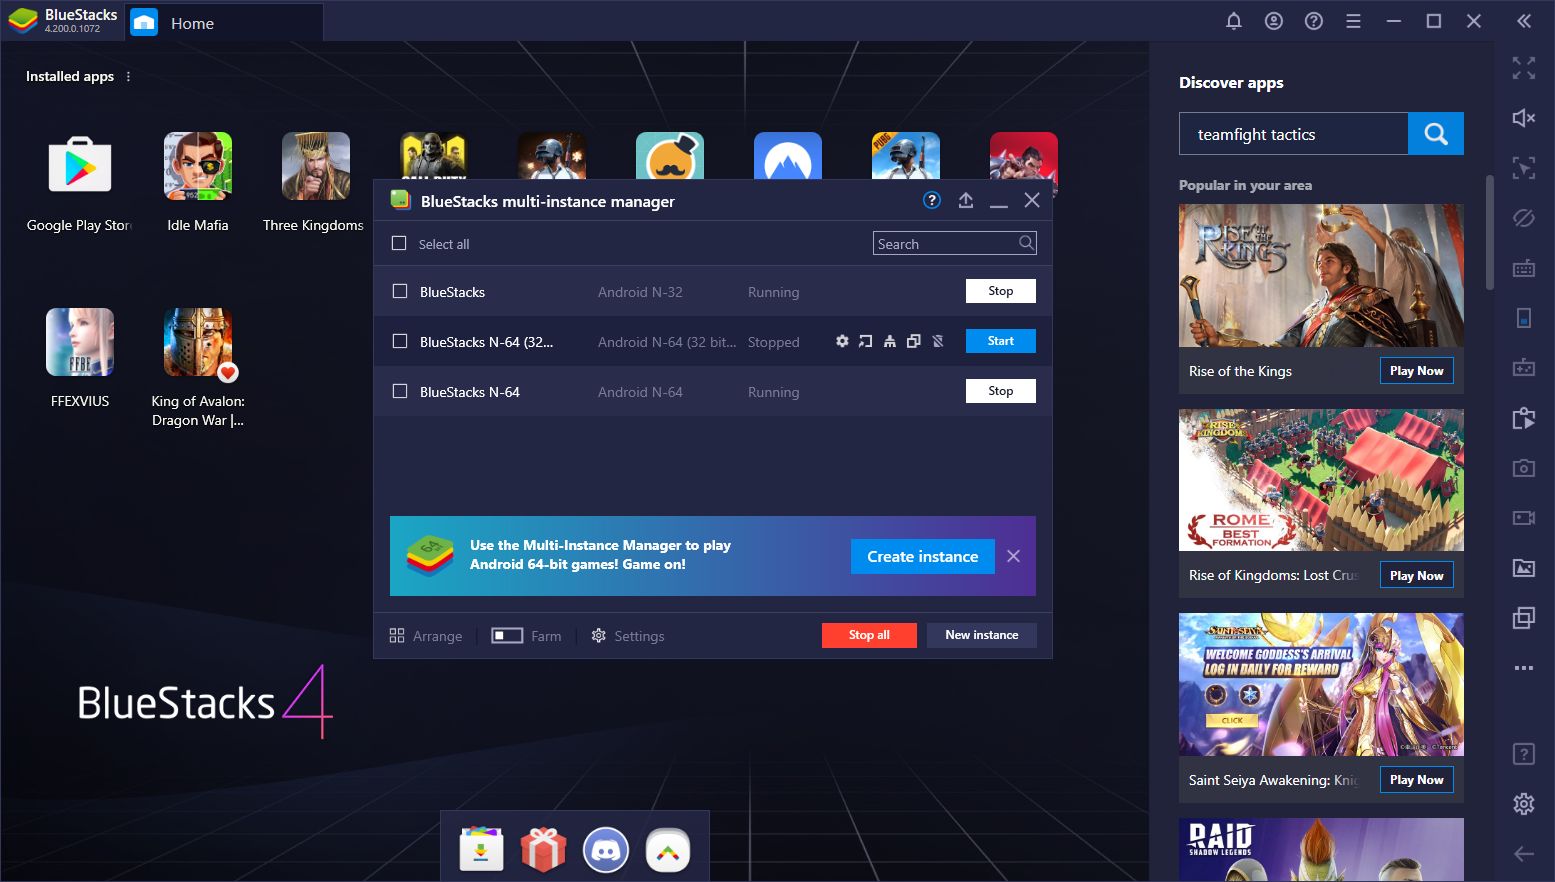 BlueStacks Version 4.200 - Play Both 64-bit and 32-bit Games Within the Same Client